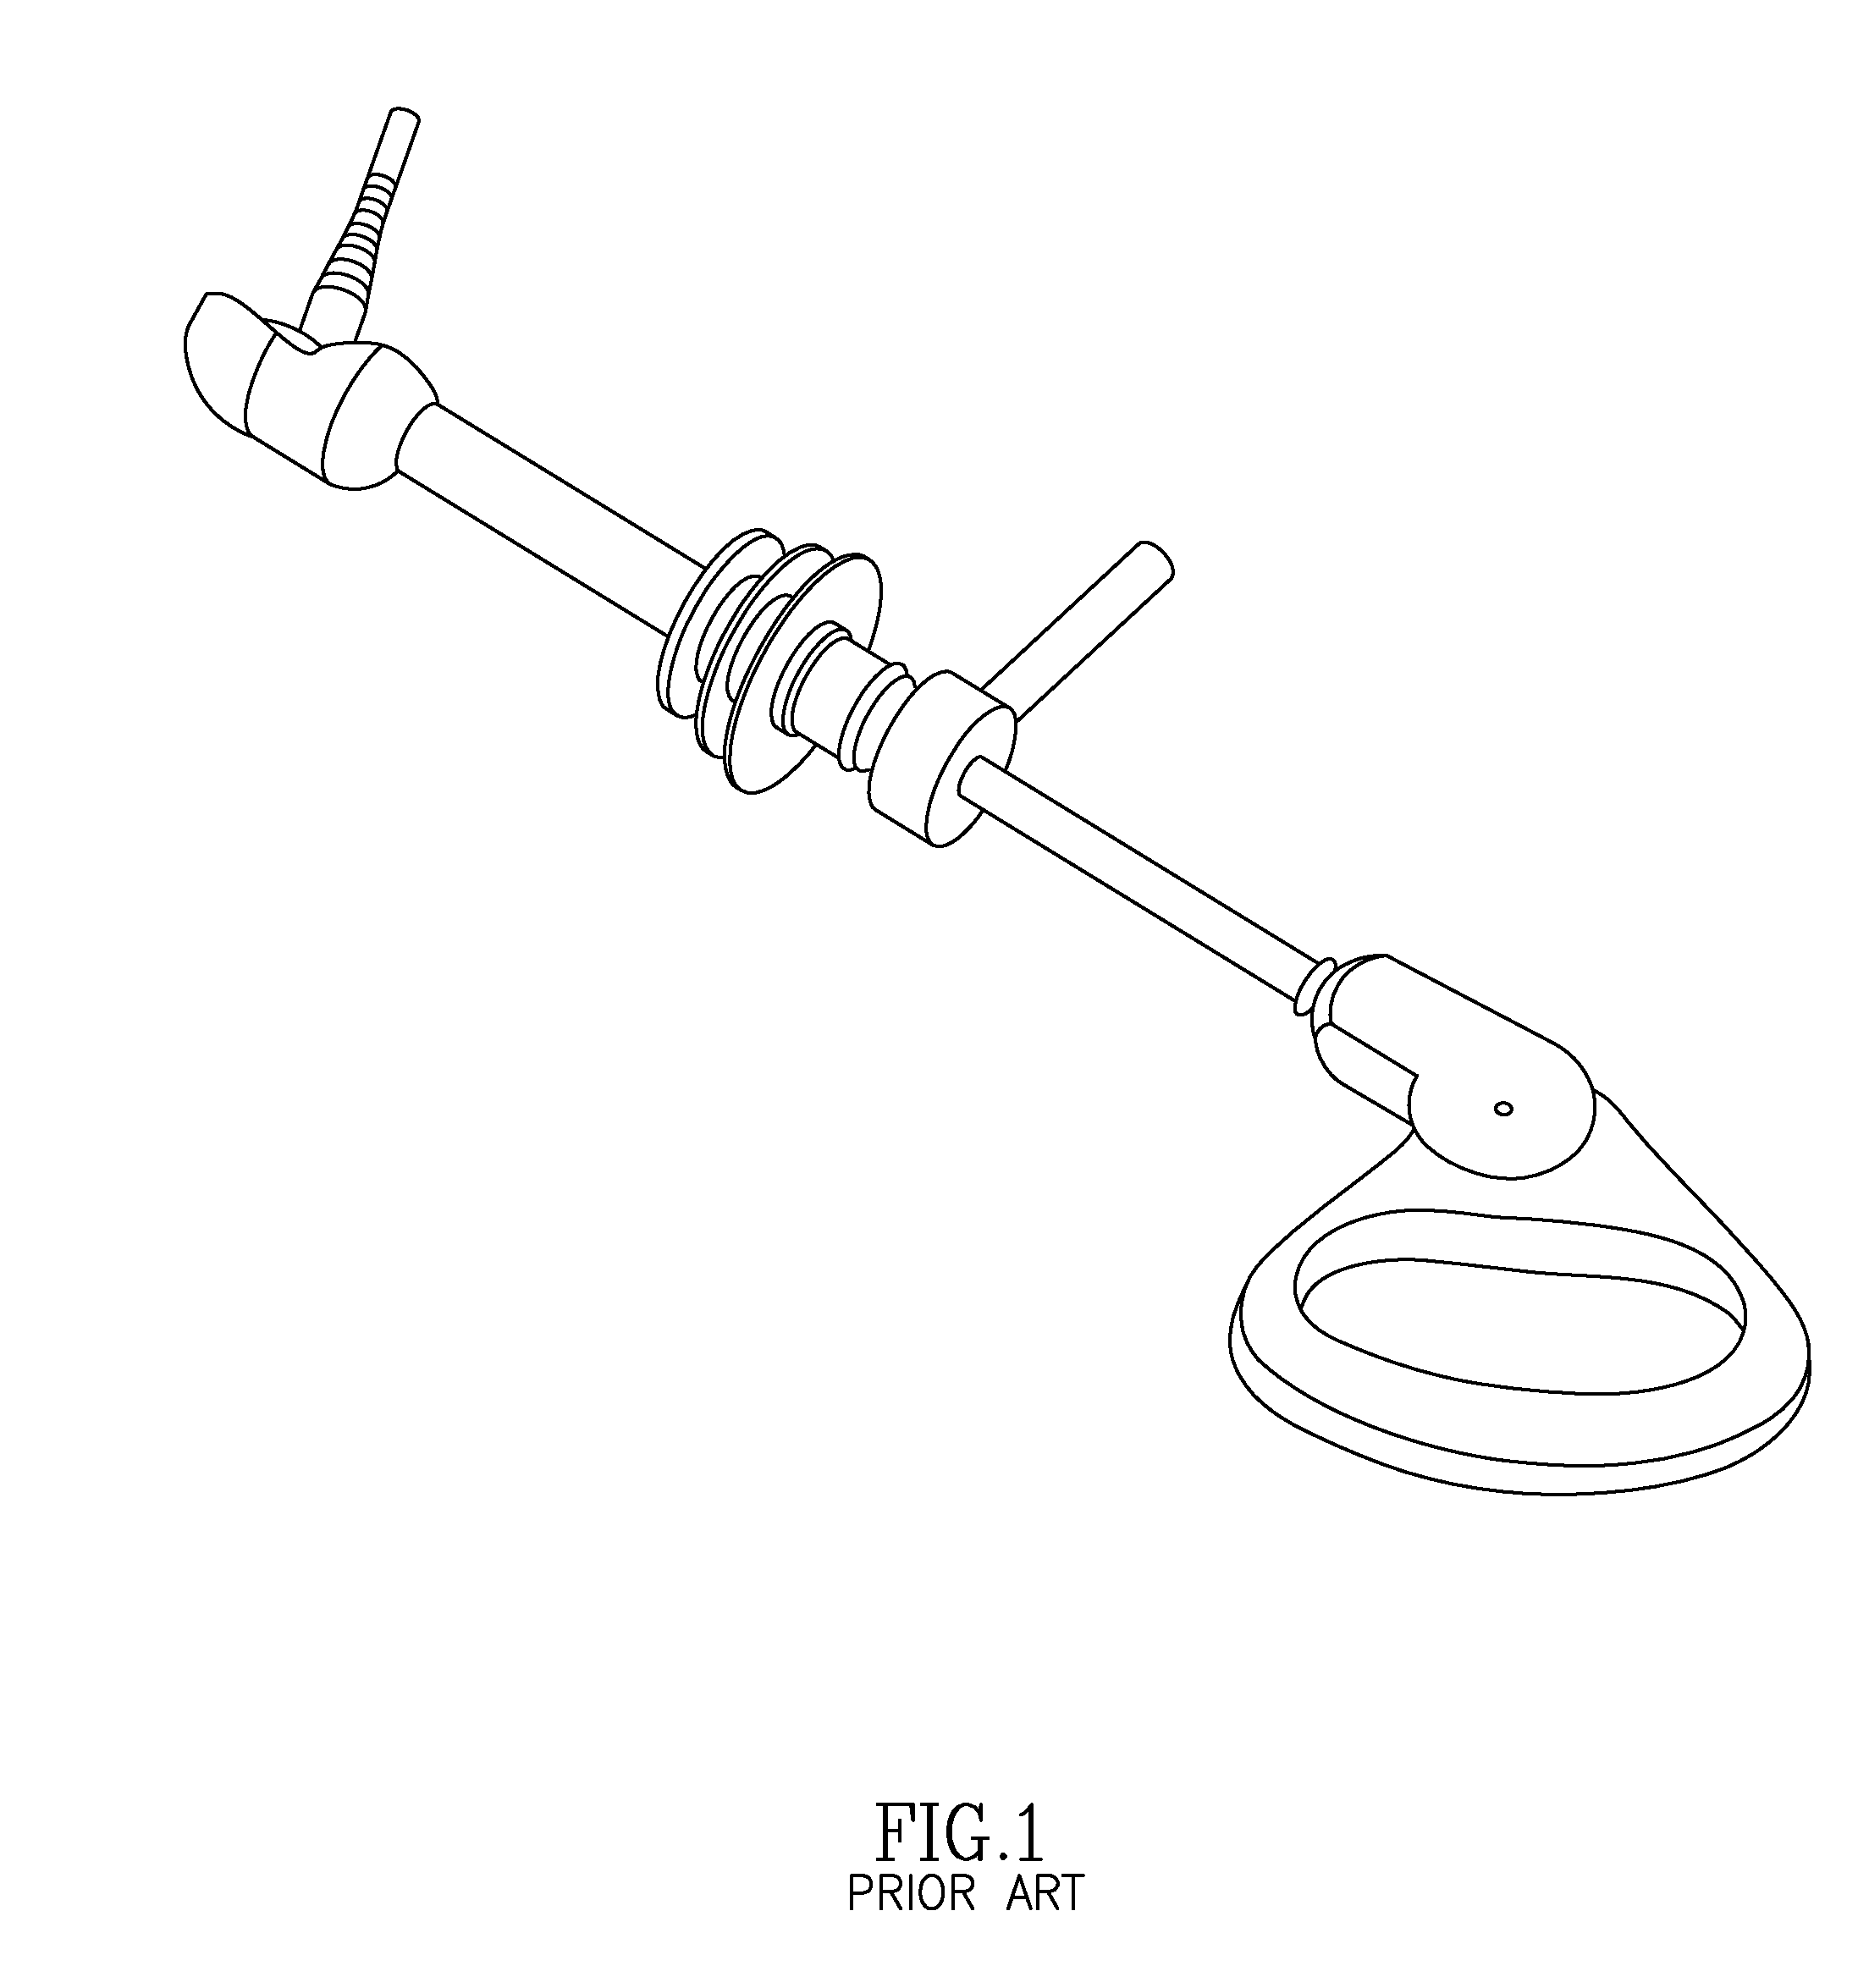 Surgical manipulation and occlusion device